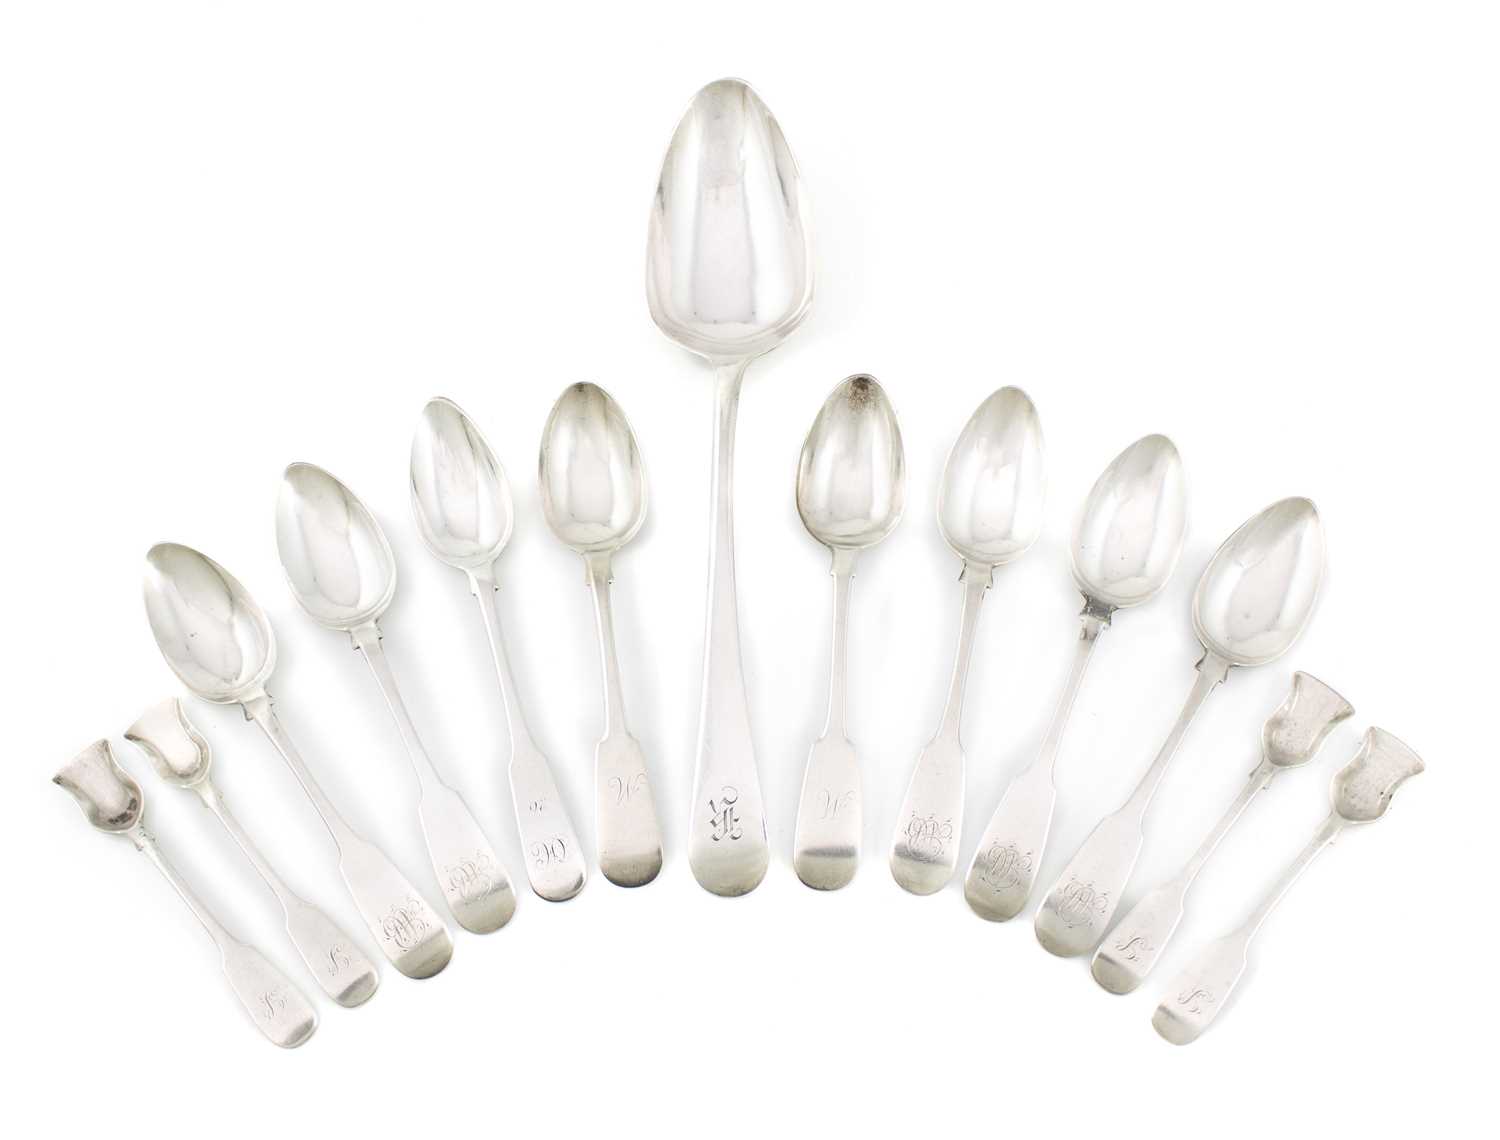 A collection of silver flatware, comprising: a 19th century Canadian silver tablespoon, by Michael